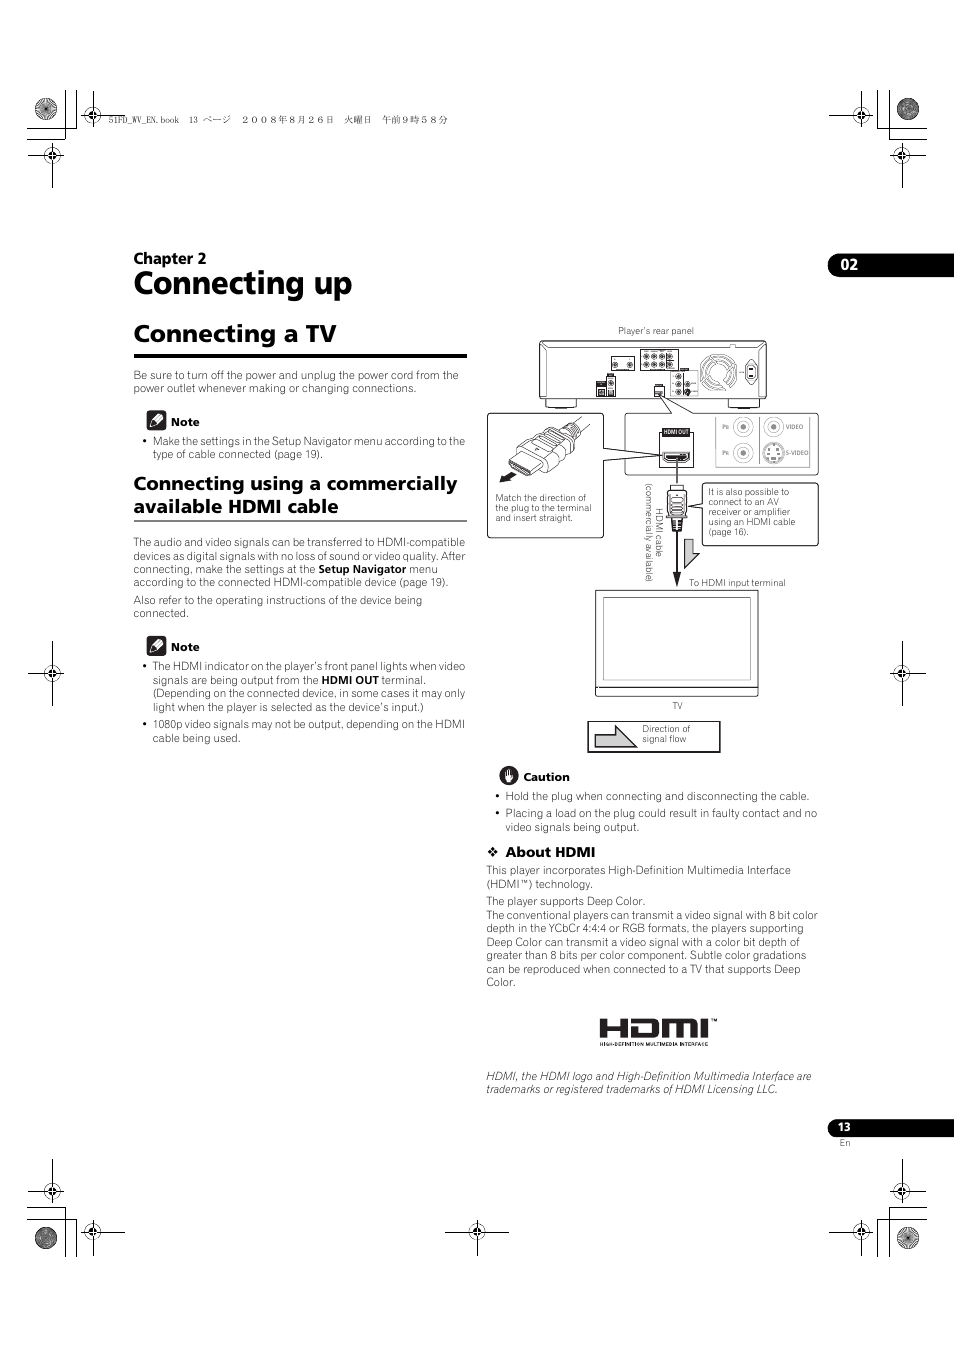 Connecting a tv, Connecting up, 02 chapter 2 | Pioneer BDP-51FD User Manual | Page 13 / 72